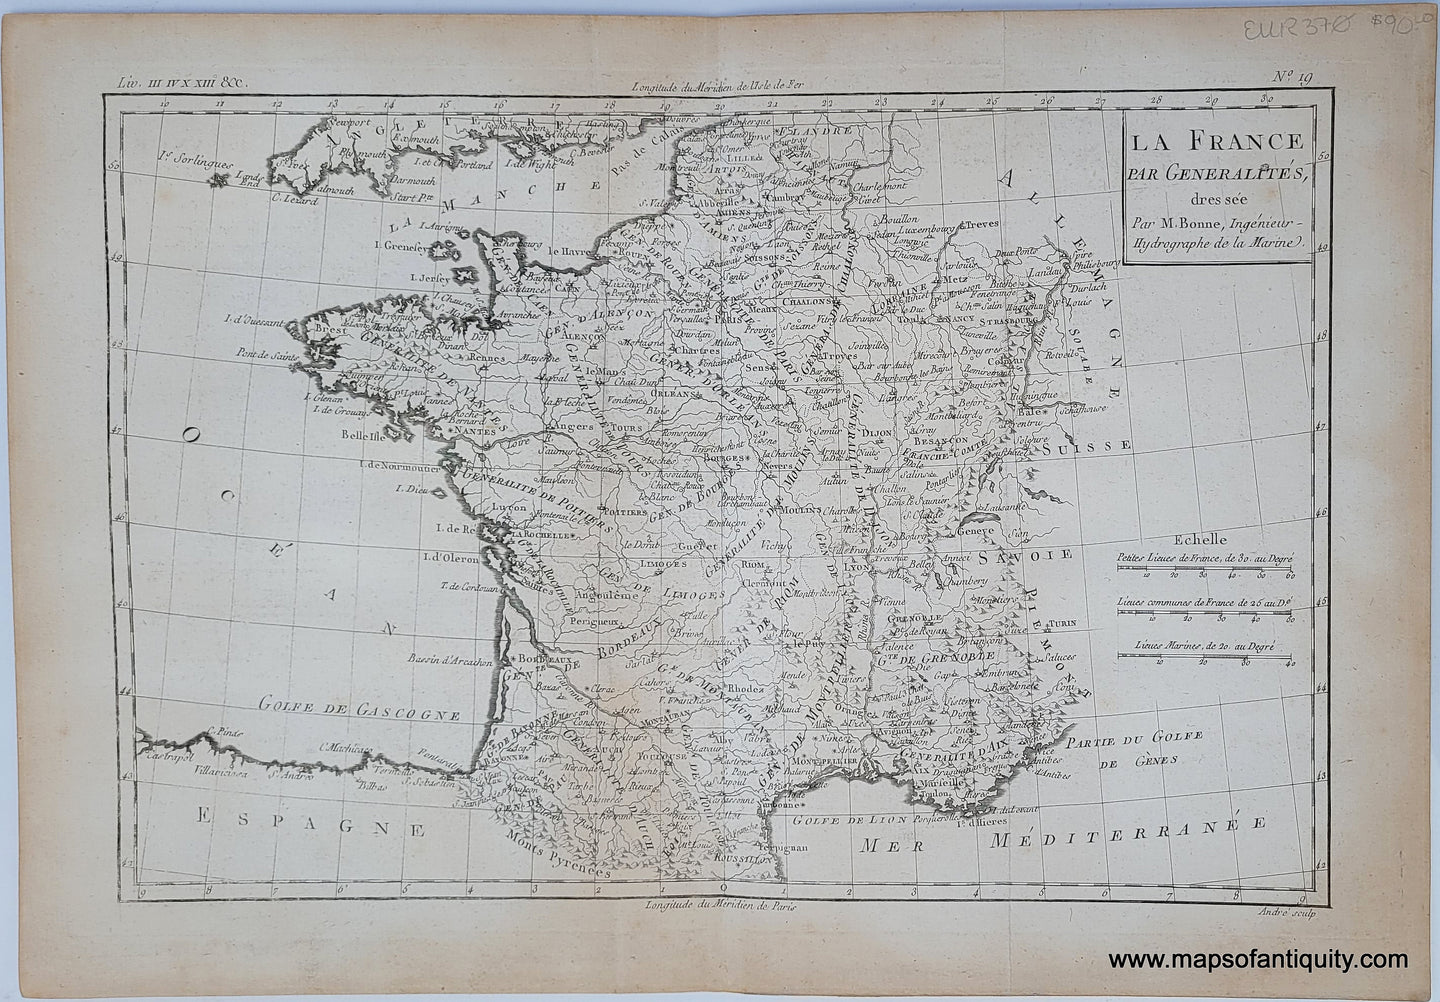 Antique-Hand-Colored-Map-La-France.-Europe-France-1780-Raynal-and-Bonne-Maps-Of-Antiquity